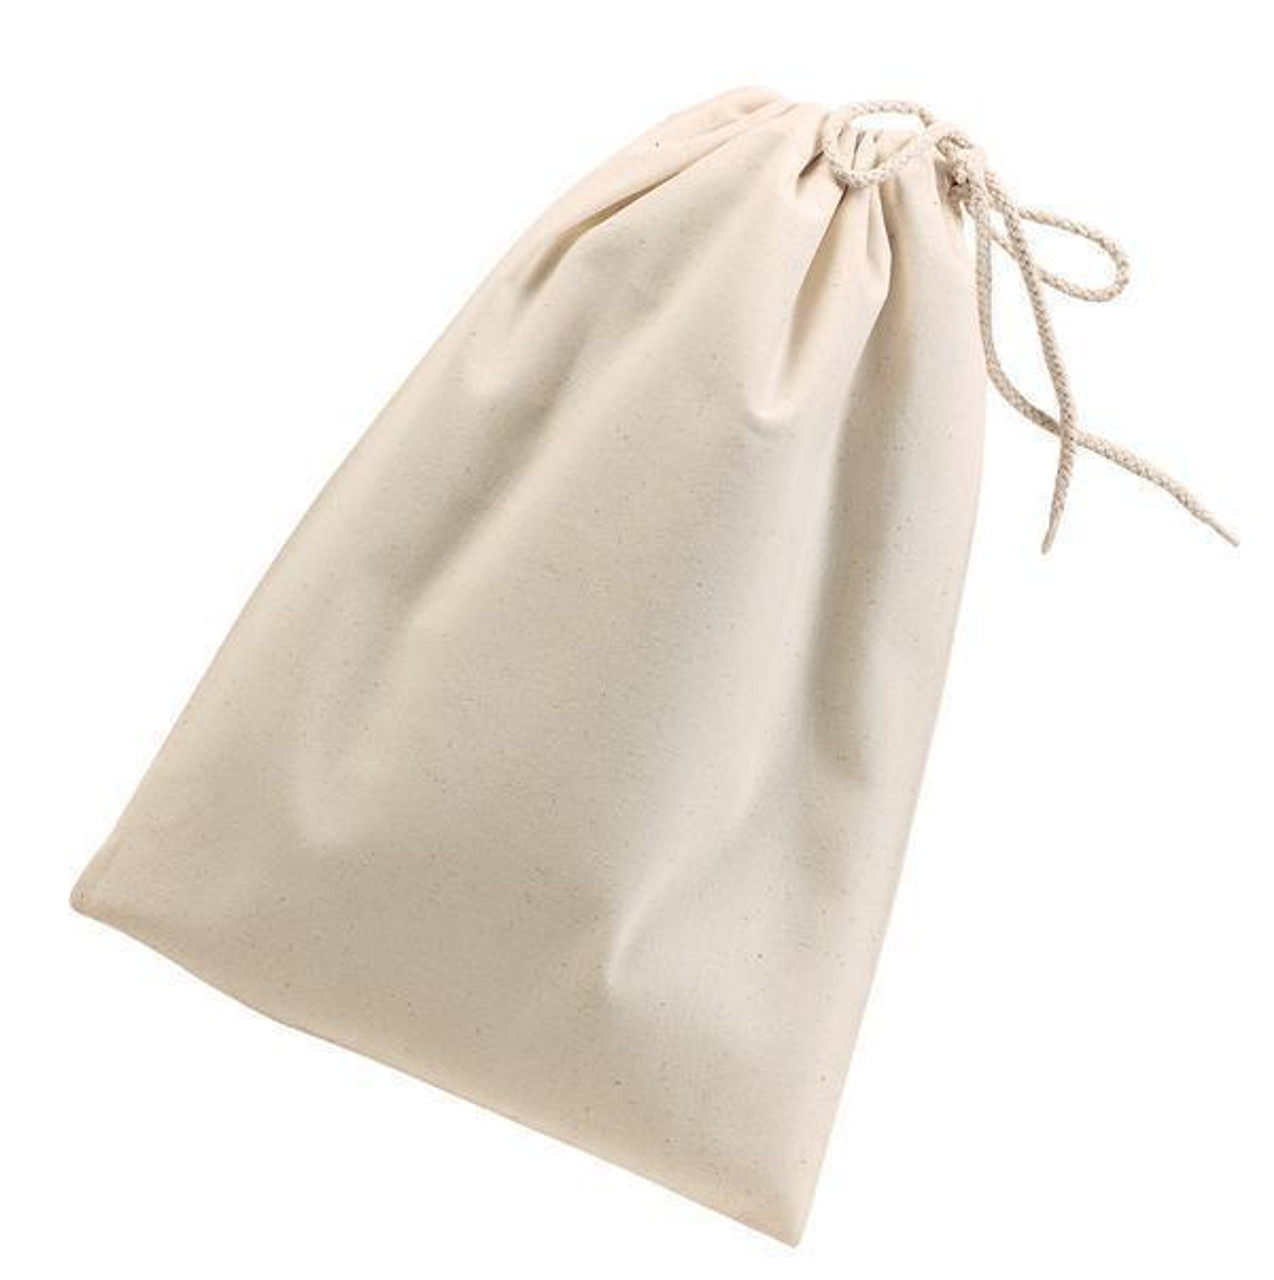 Wholesale Draw String Bags